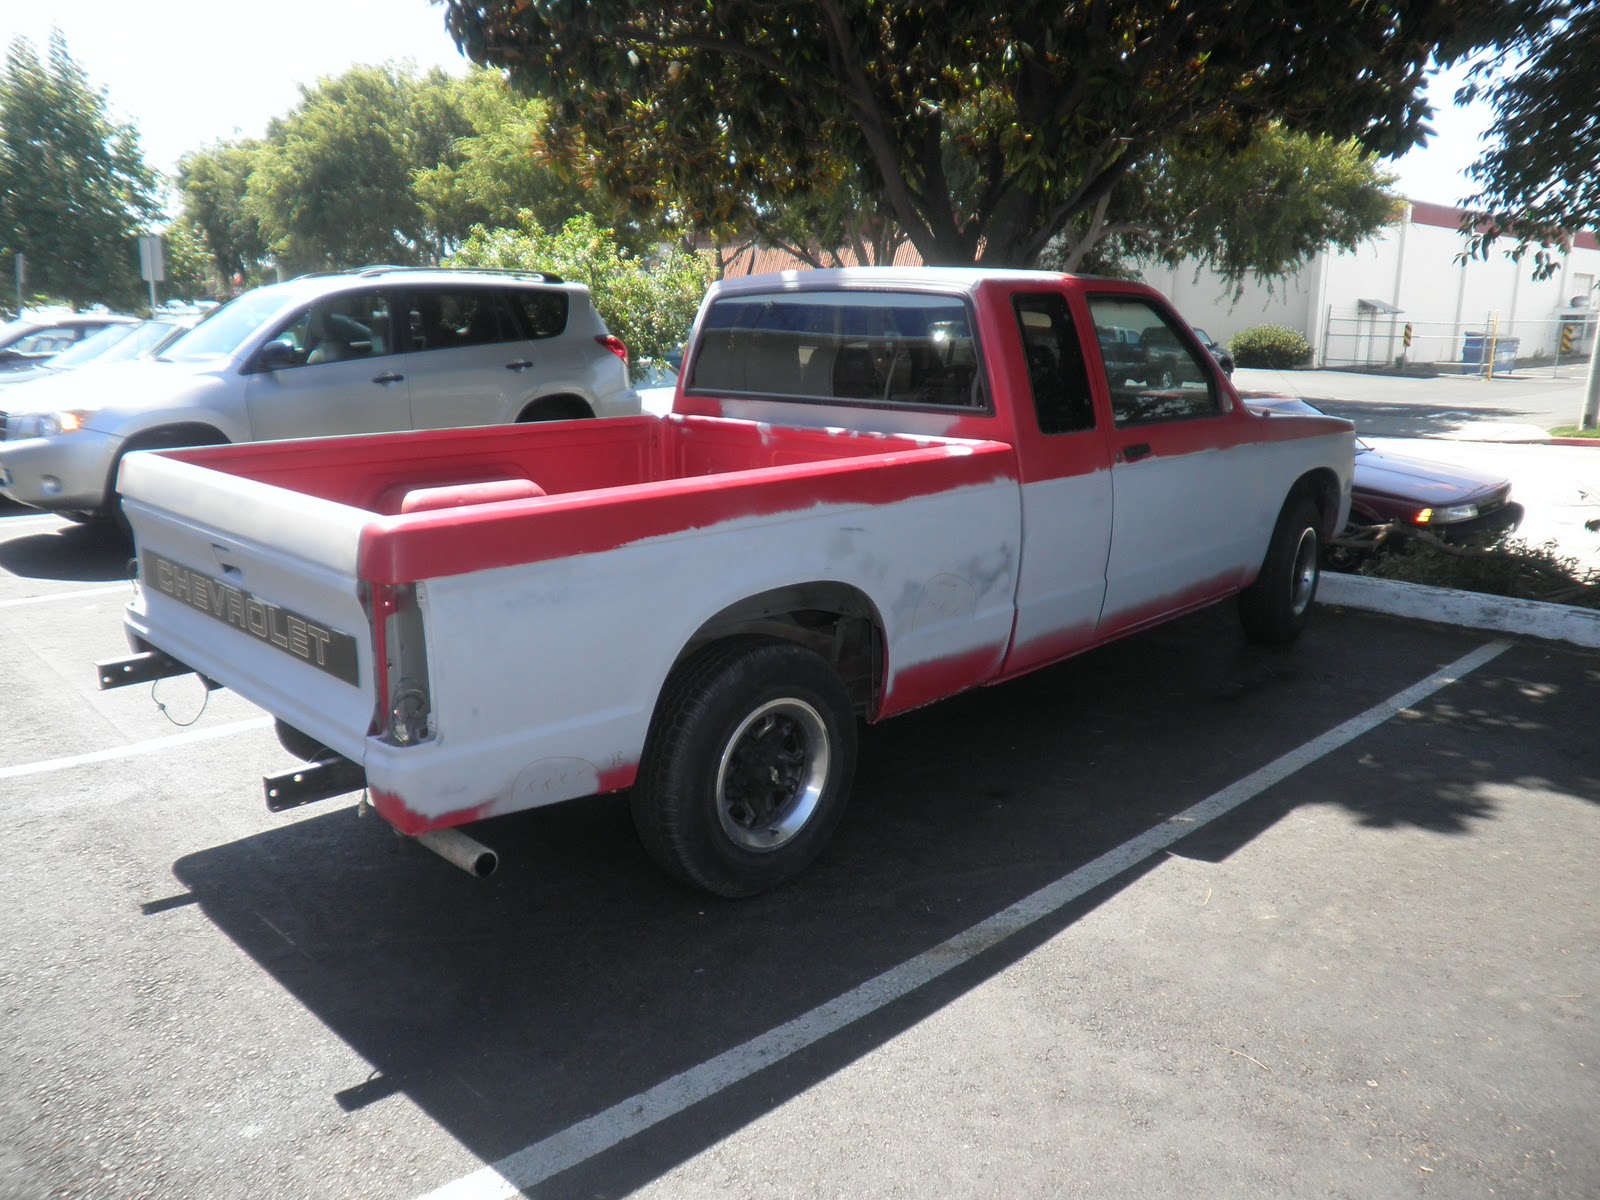 Car of the Day - 1991 Chevrolet S10 Pick-up truck with 2-tone paint job.